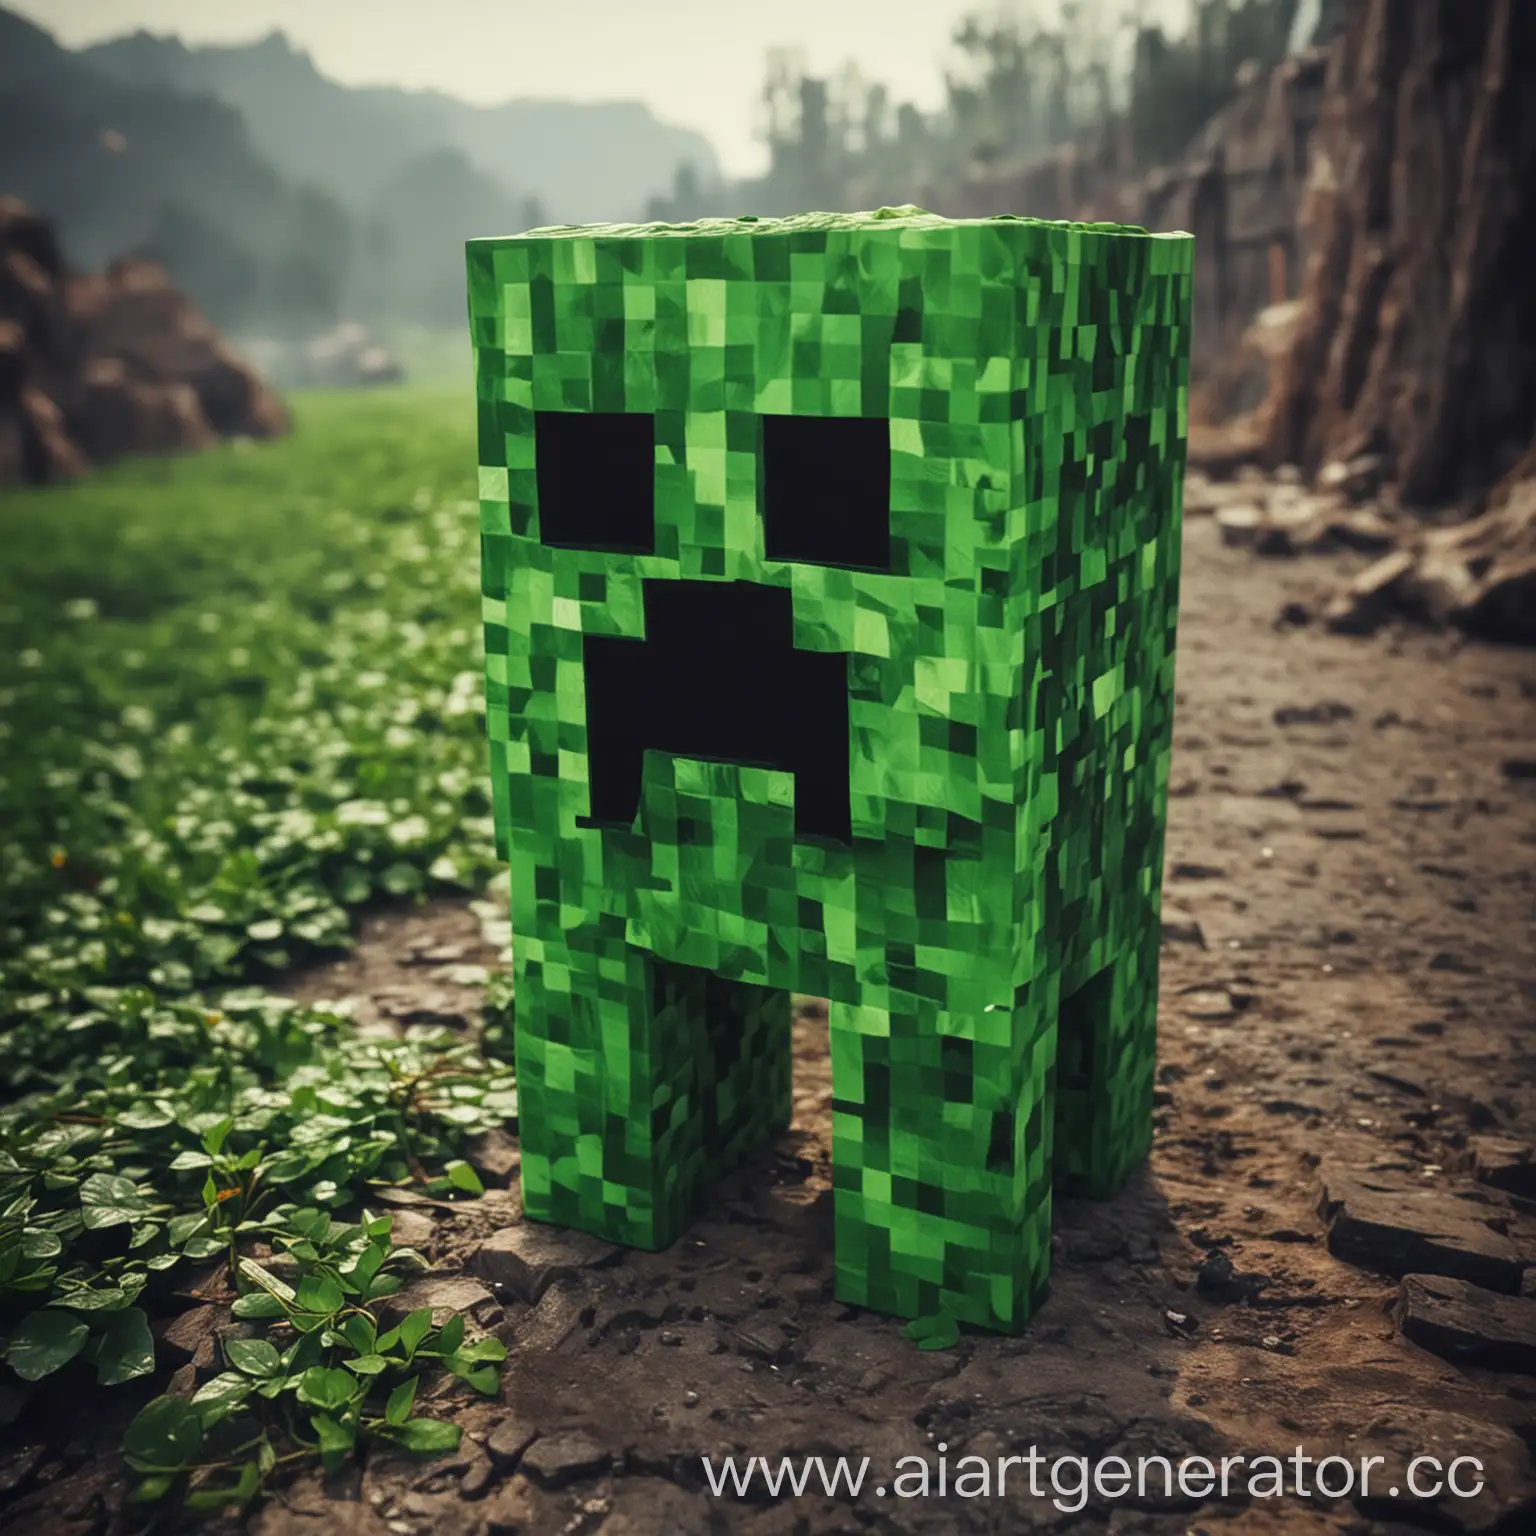 Realistic-Minecraft-Creeper-in-Natural-Environment